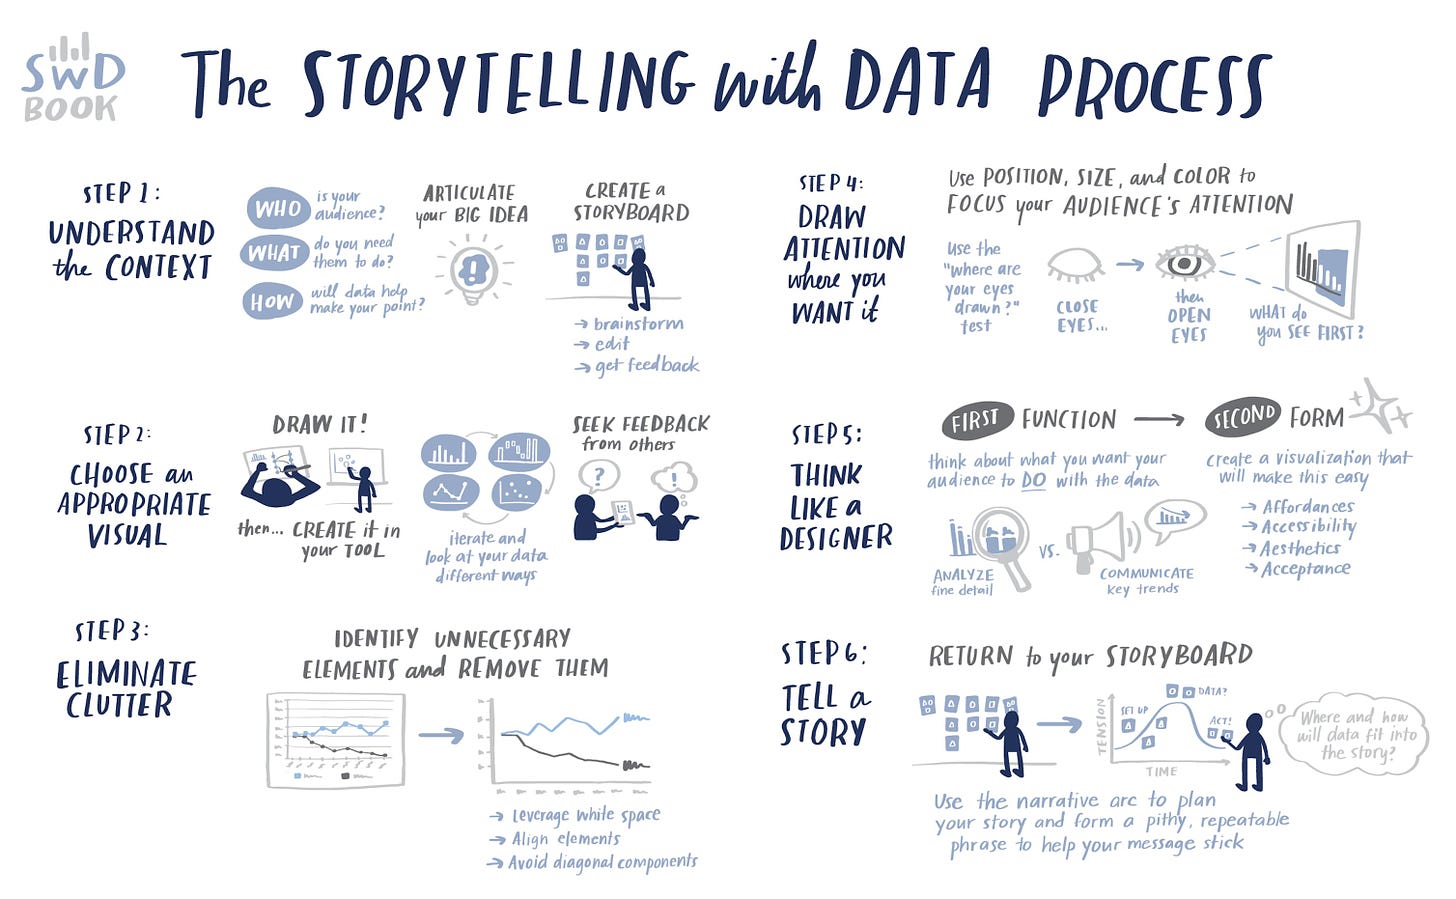 Cole Knaflic on X: "Want to transition from making graphs to telling data  stories? Here's a 6-step process. (Greater detail in my books:  https://t.co/dBkuMDUJW0) https://t.co/eAktMOoCdZ" / X